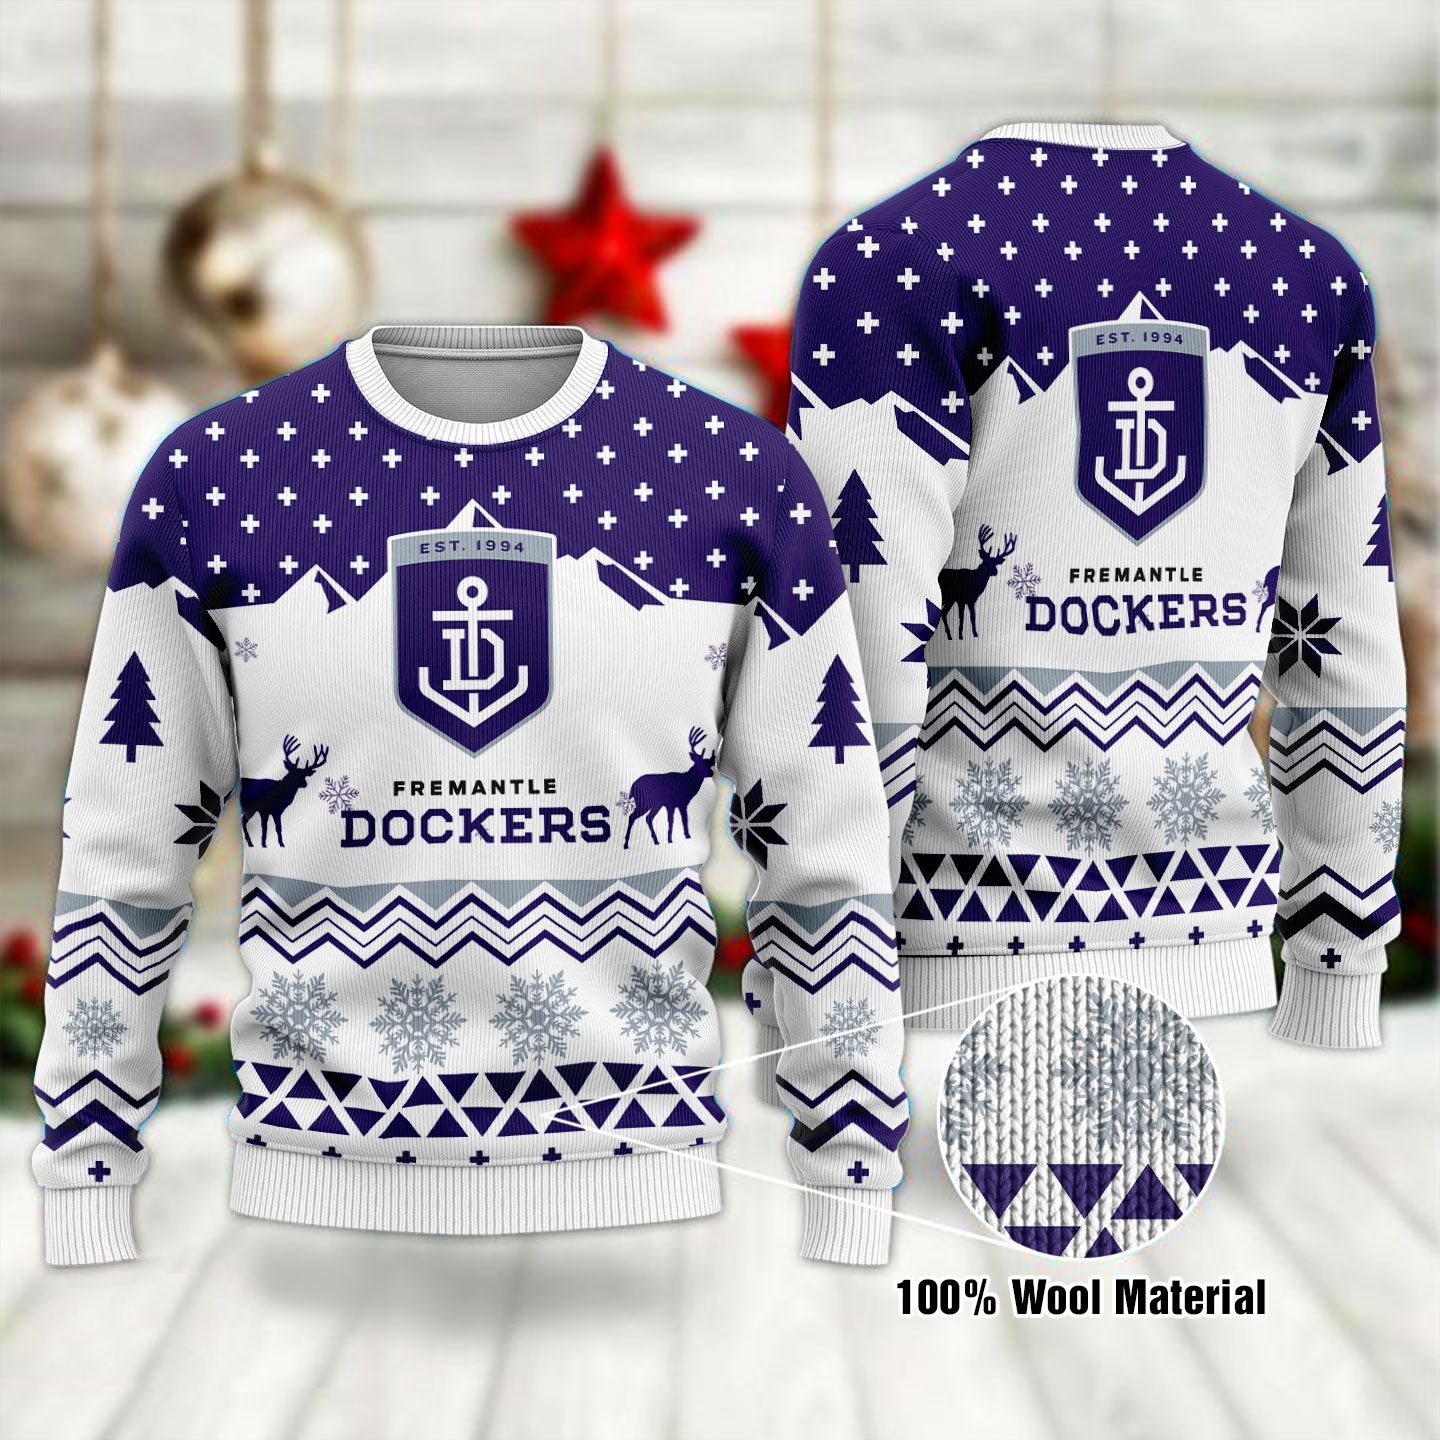 Middily- Fremantle Football Club AFL - Ugly Xmas Sweater,Holiday 2021 Sweater,Secret Santa,Christmas Sweater Gift,Gag Gift - 3D Sweater